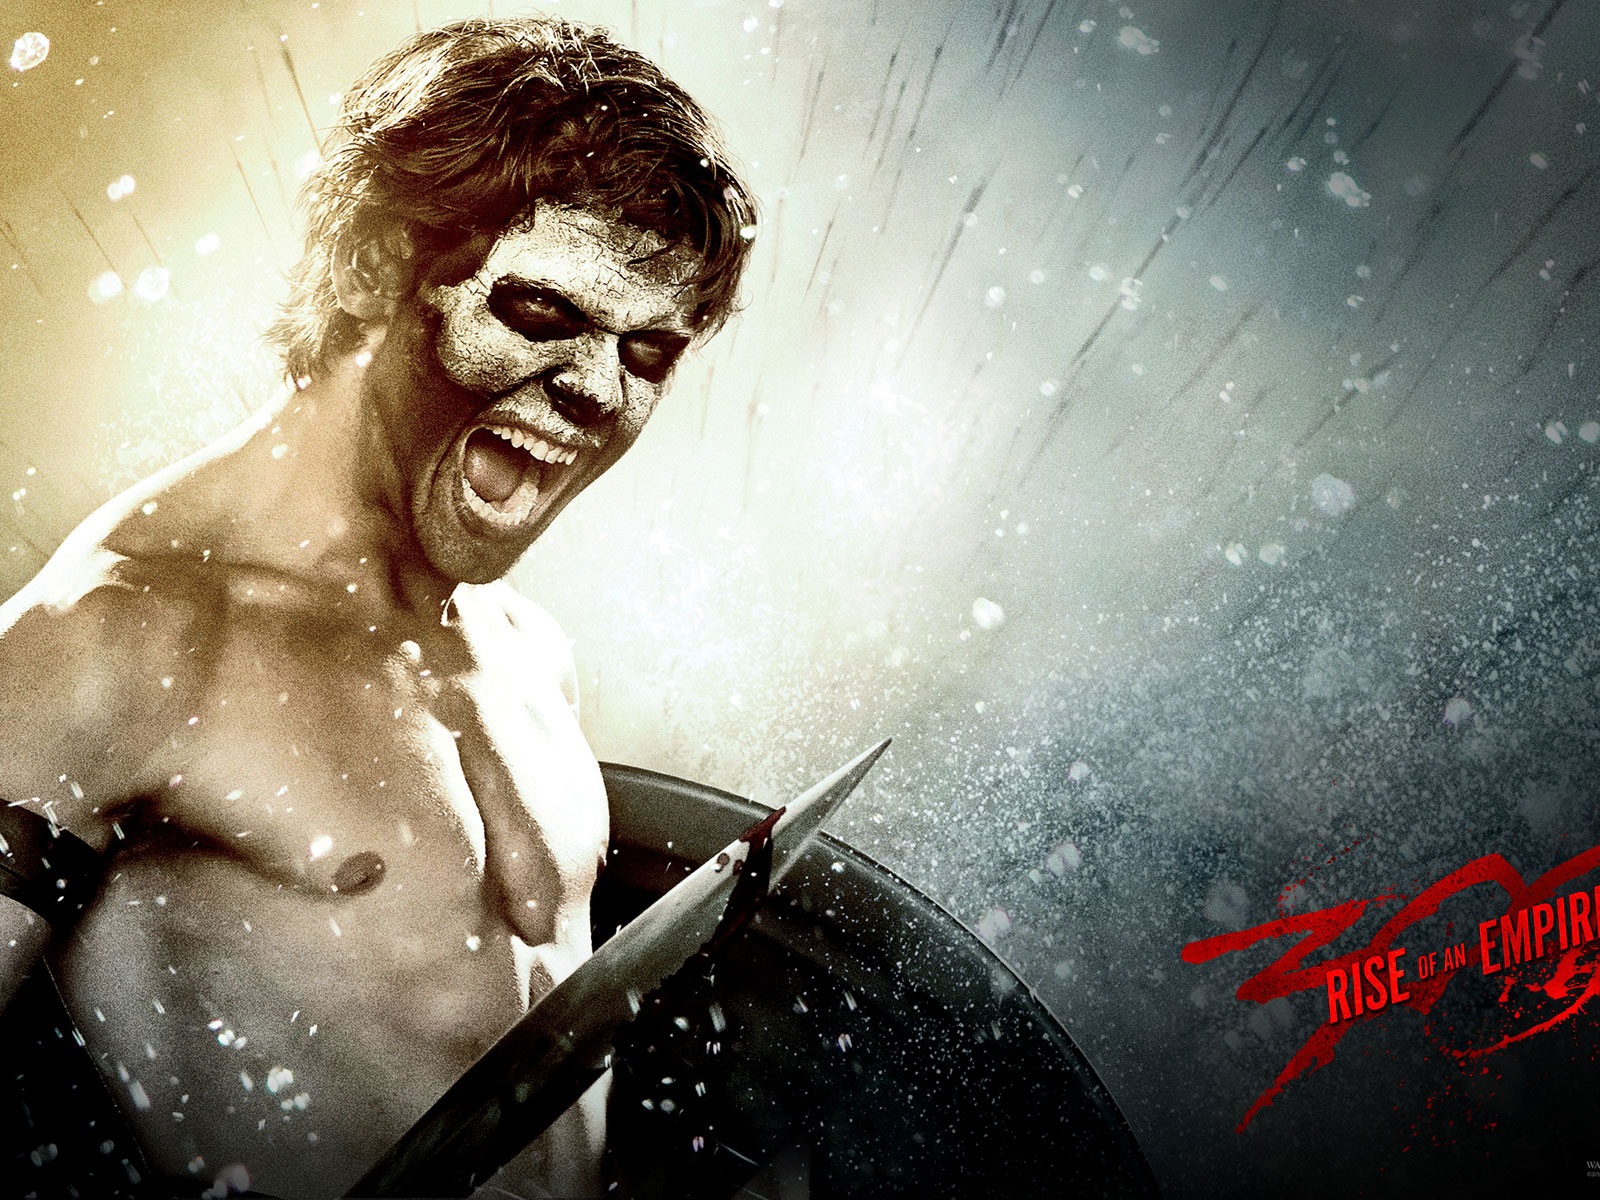 300: Rise of an Empire HD movie wallpapers #4 - 1600x1200